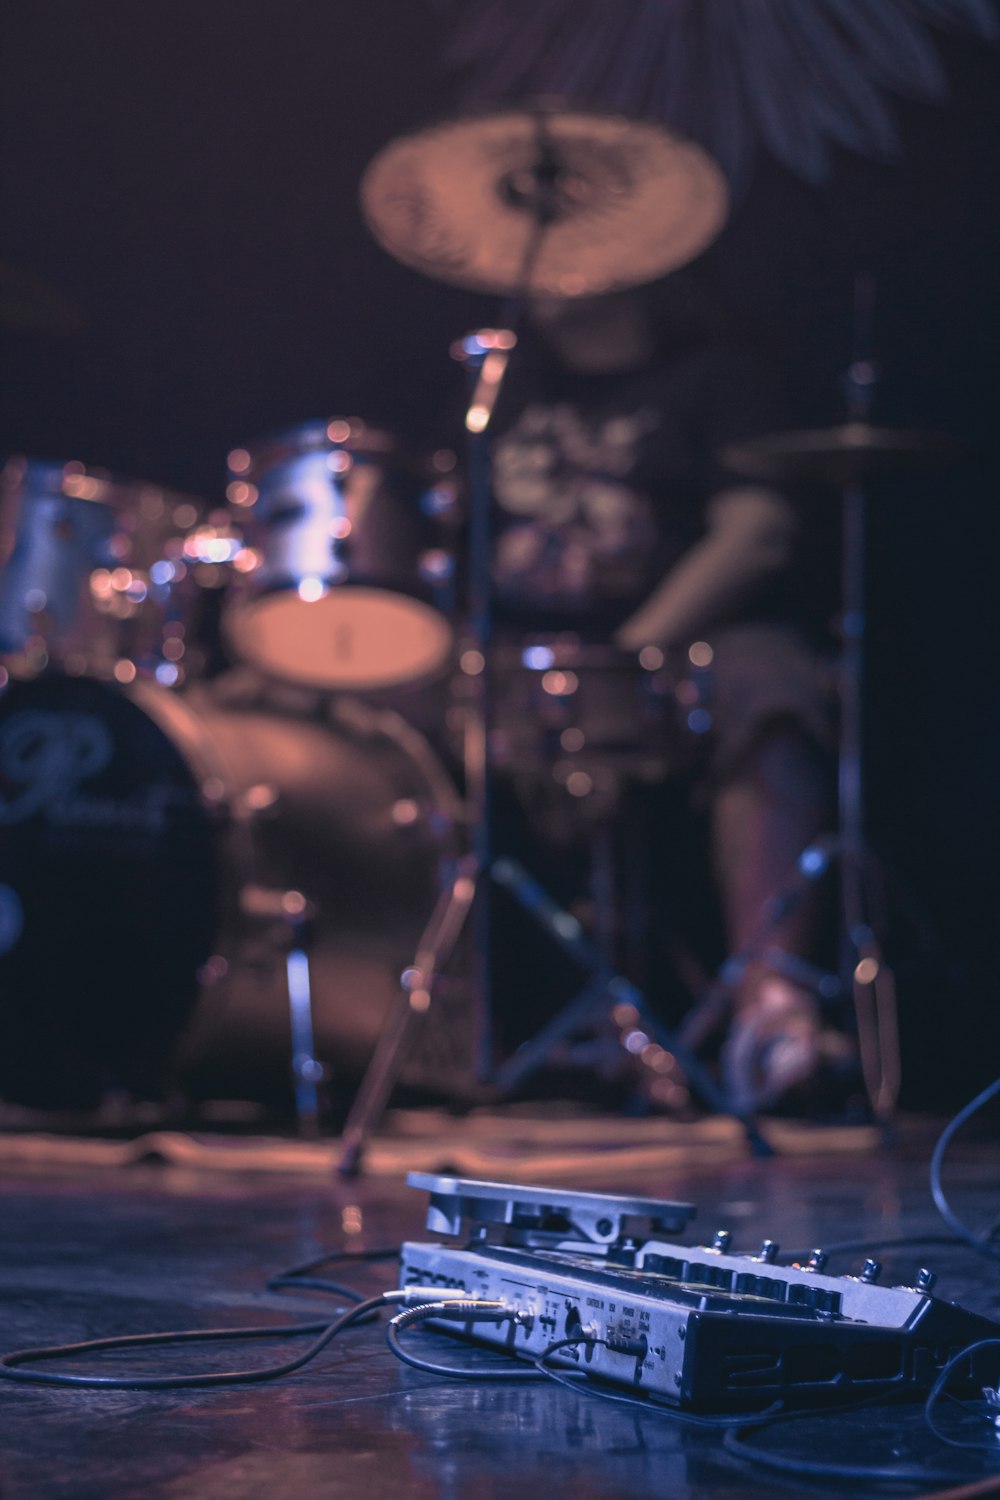 low-angle photography of man playing drum set